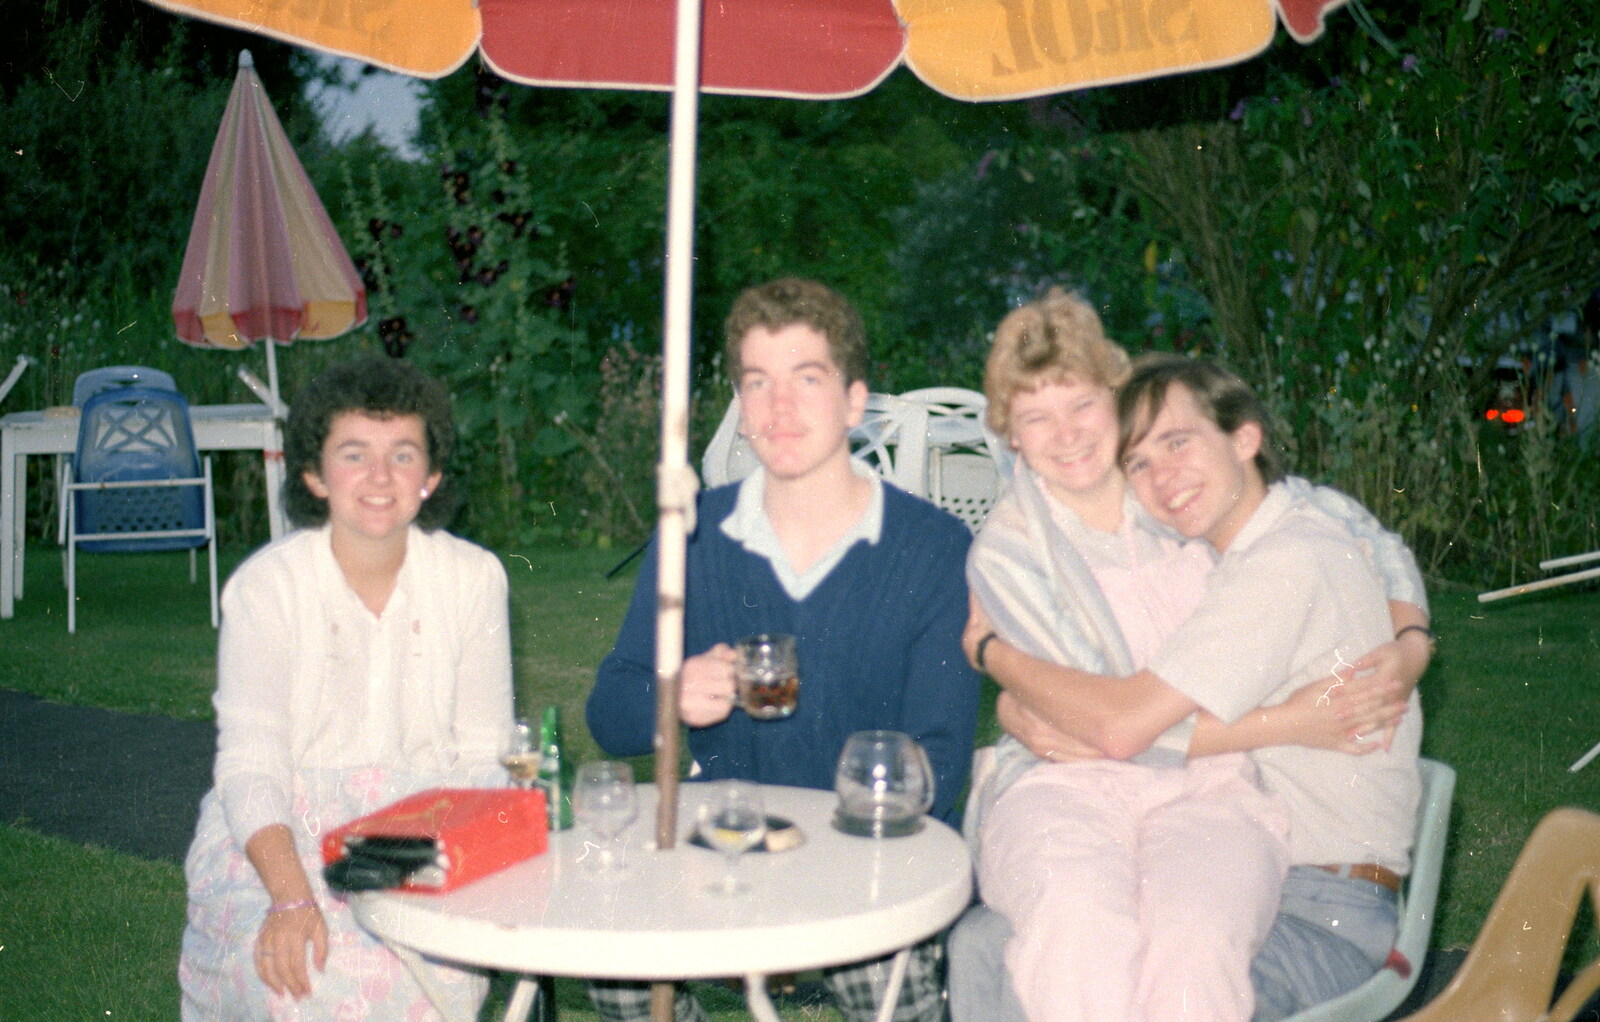 Liz, Jon, Anna and Phil in a pub garden somewhere from Nosher Goes Windsurfing, Macclesfield, Cheshire - 20th June 1985